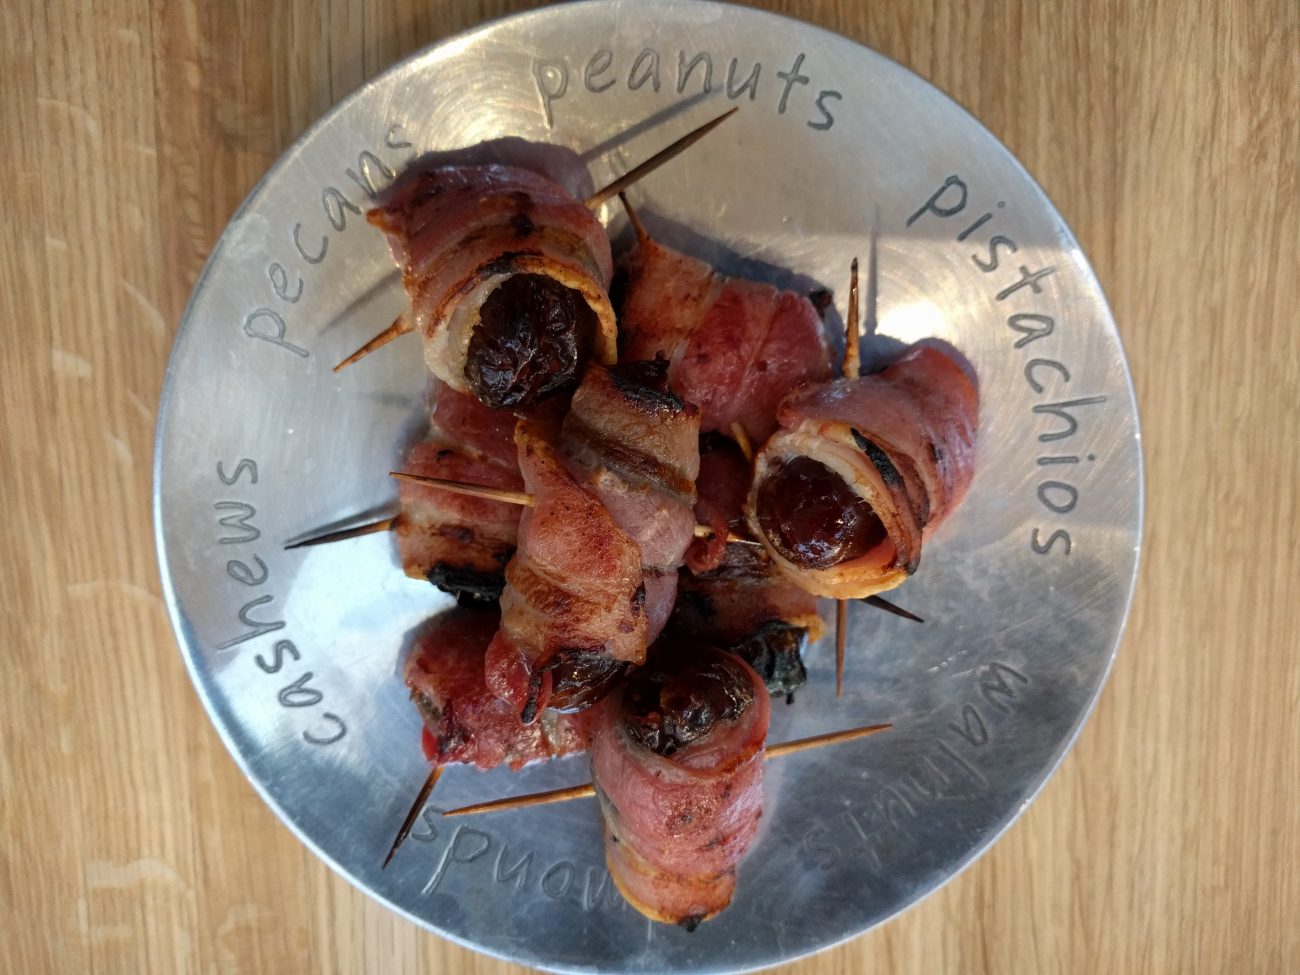 Stuffed Dates wrapped in Bacon